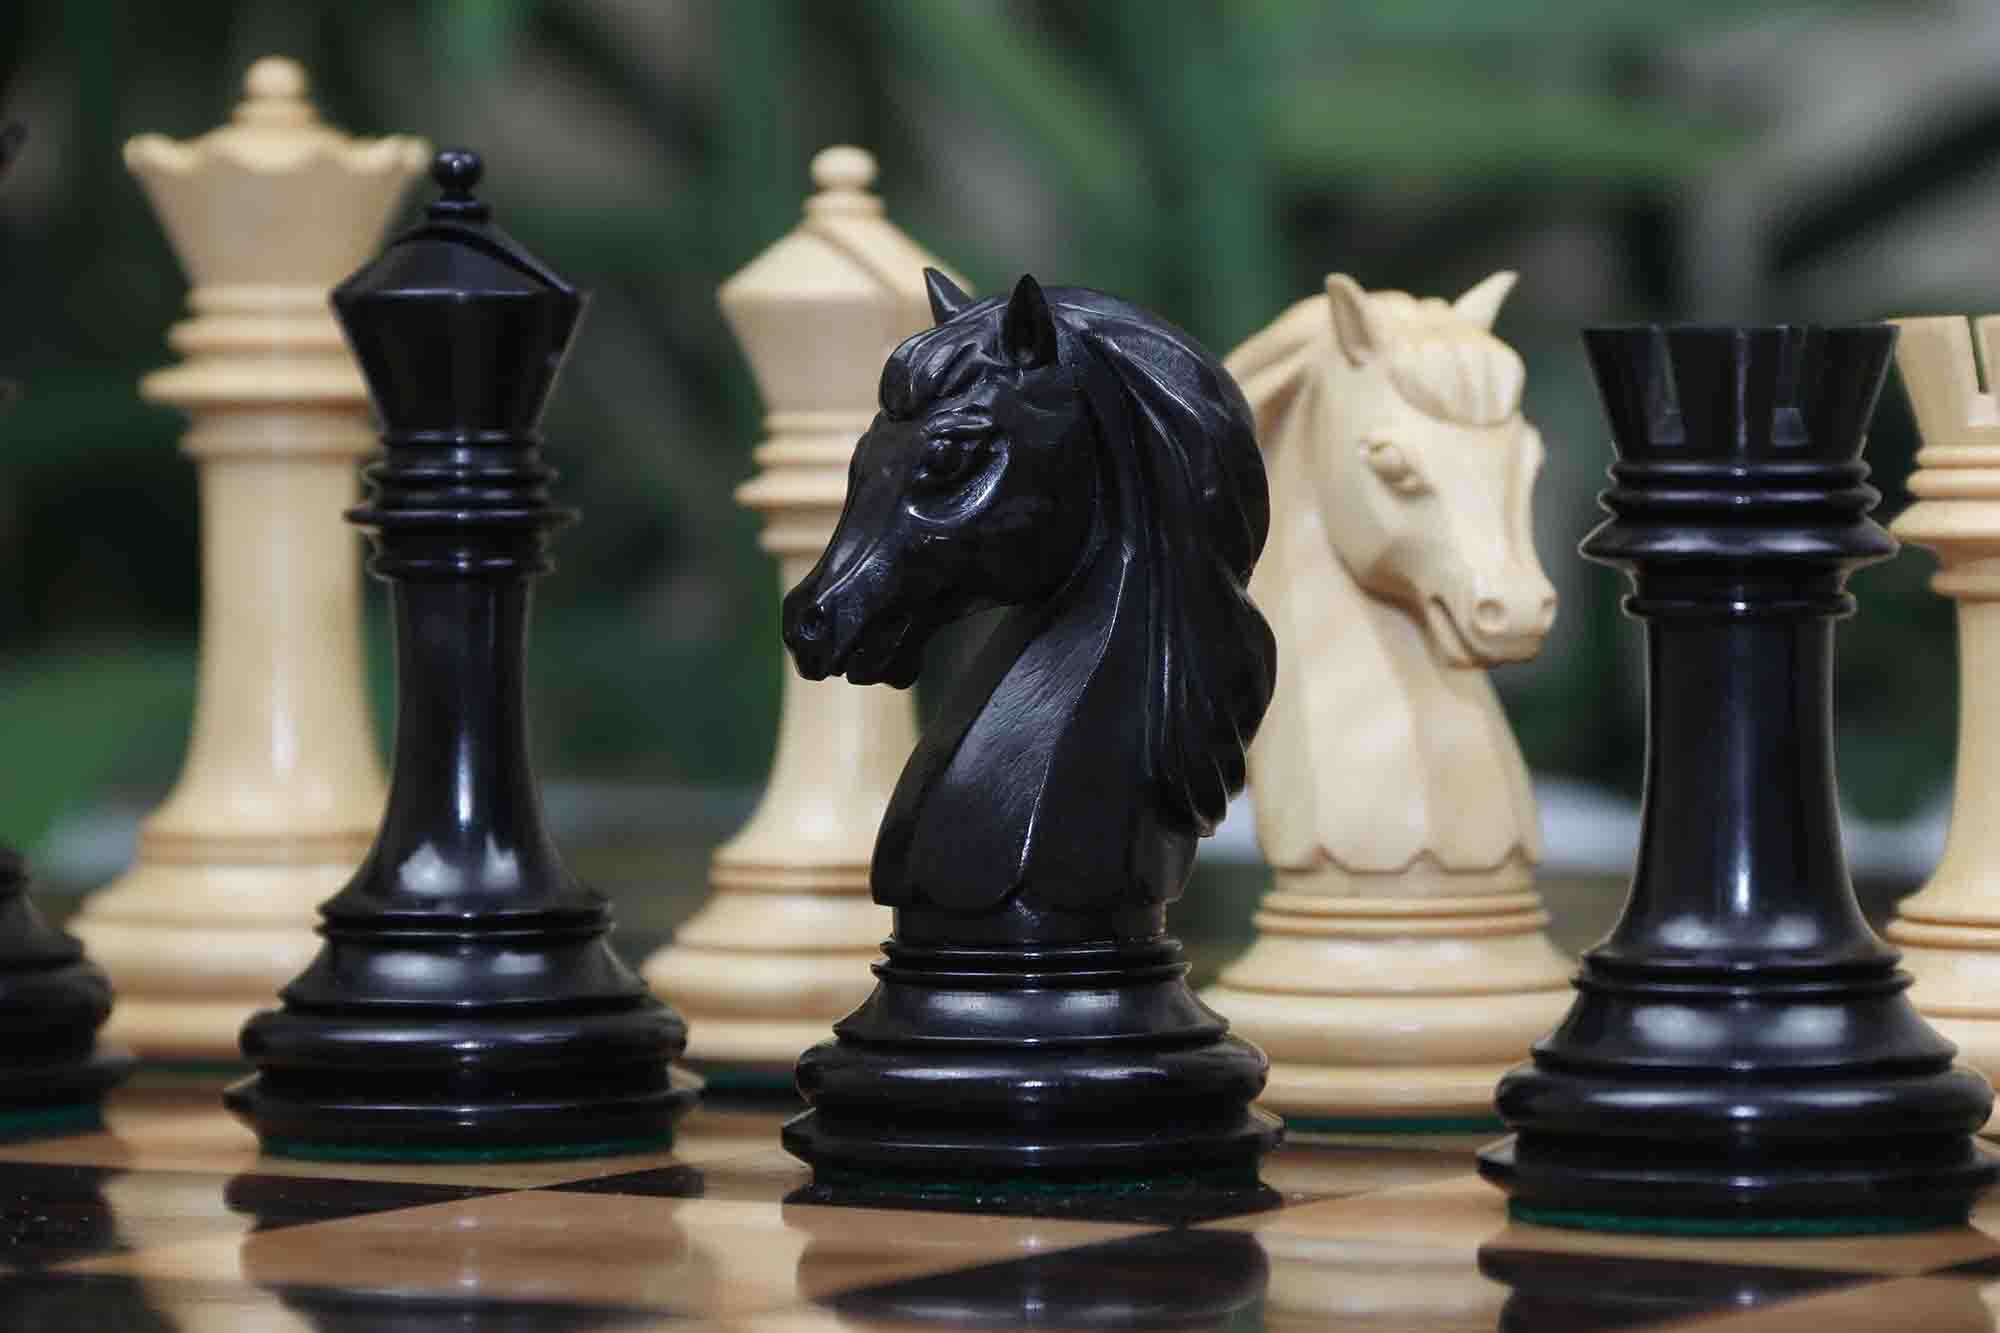 The Cavalry Luxury Chess Set in Ebony & Walnut [RCPB320] - $615.00 -  Regency Chess - Finest Quality Chess Sets, Boards & Pieces